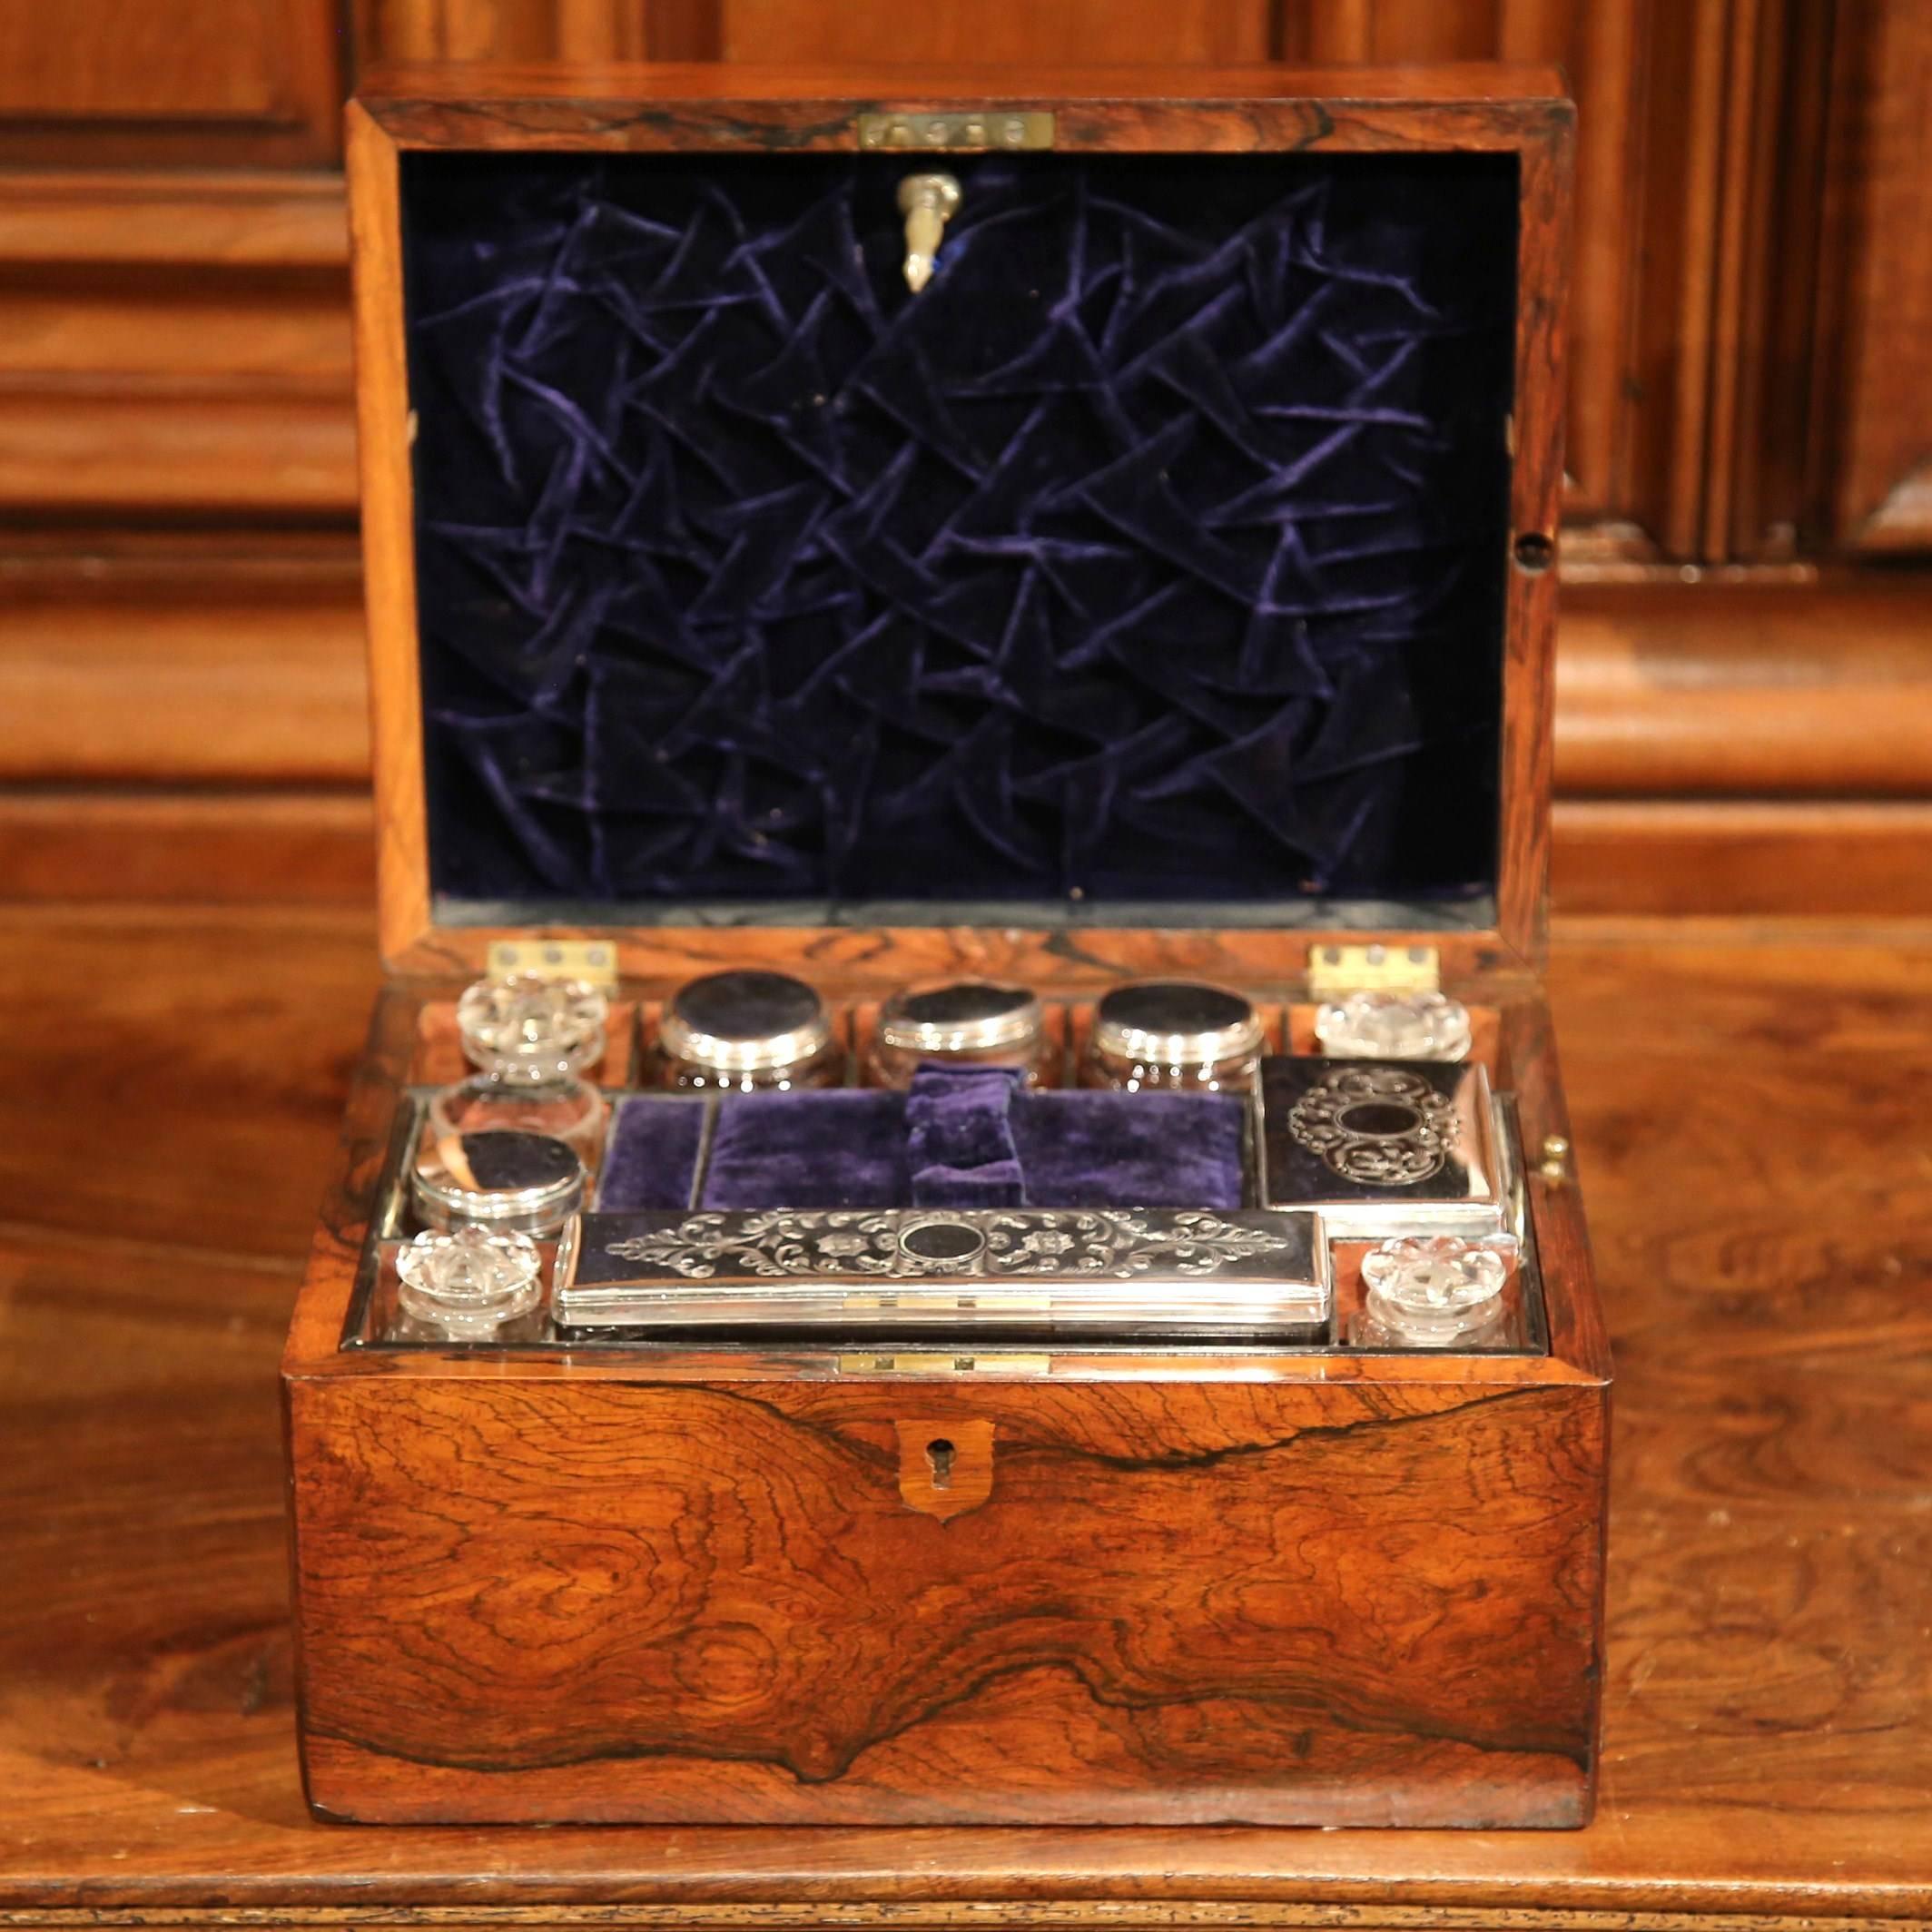 This beautiful antique jewelry box set was crafted in France, circa 1850. The box has a mother-of-pearl crest and several dividers inside. The compartments are outfitted with silver accessories, which include two square cut-glass bottles, three